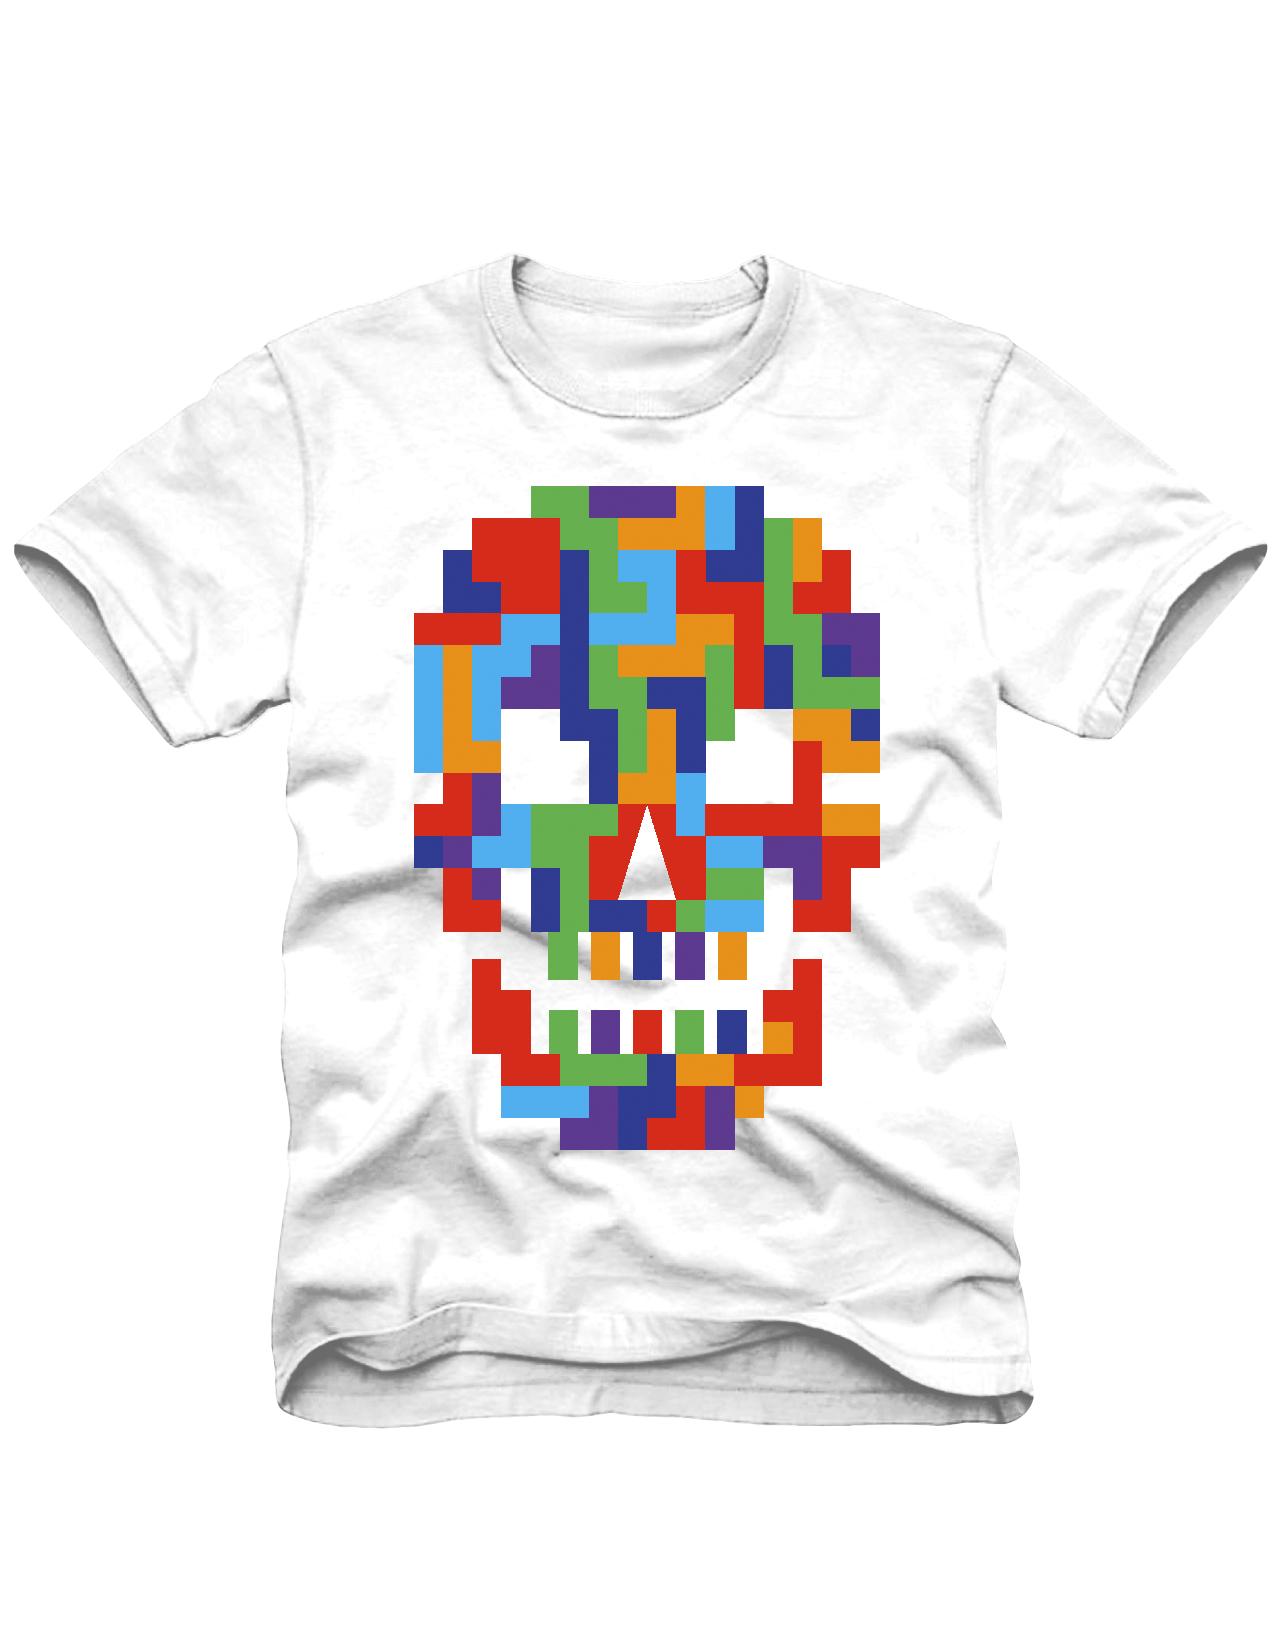 Route 66 Boy's Graphic T-Shirt - Skull